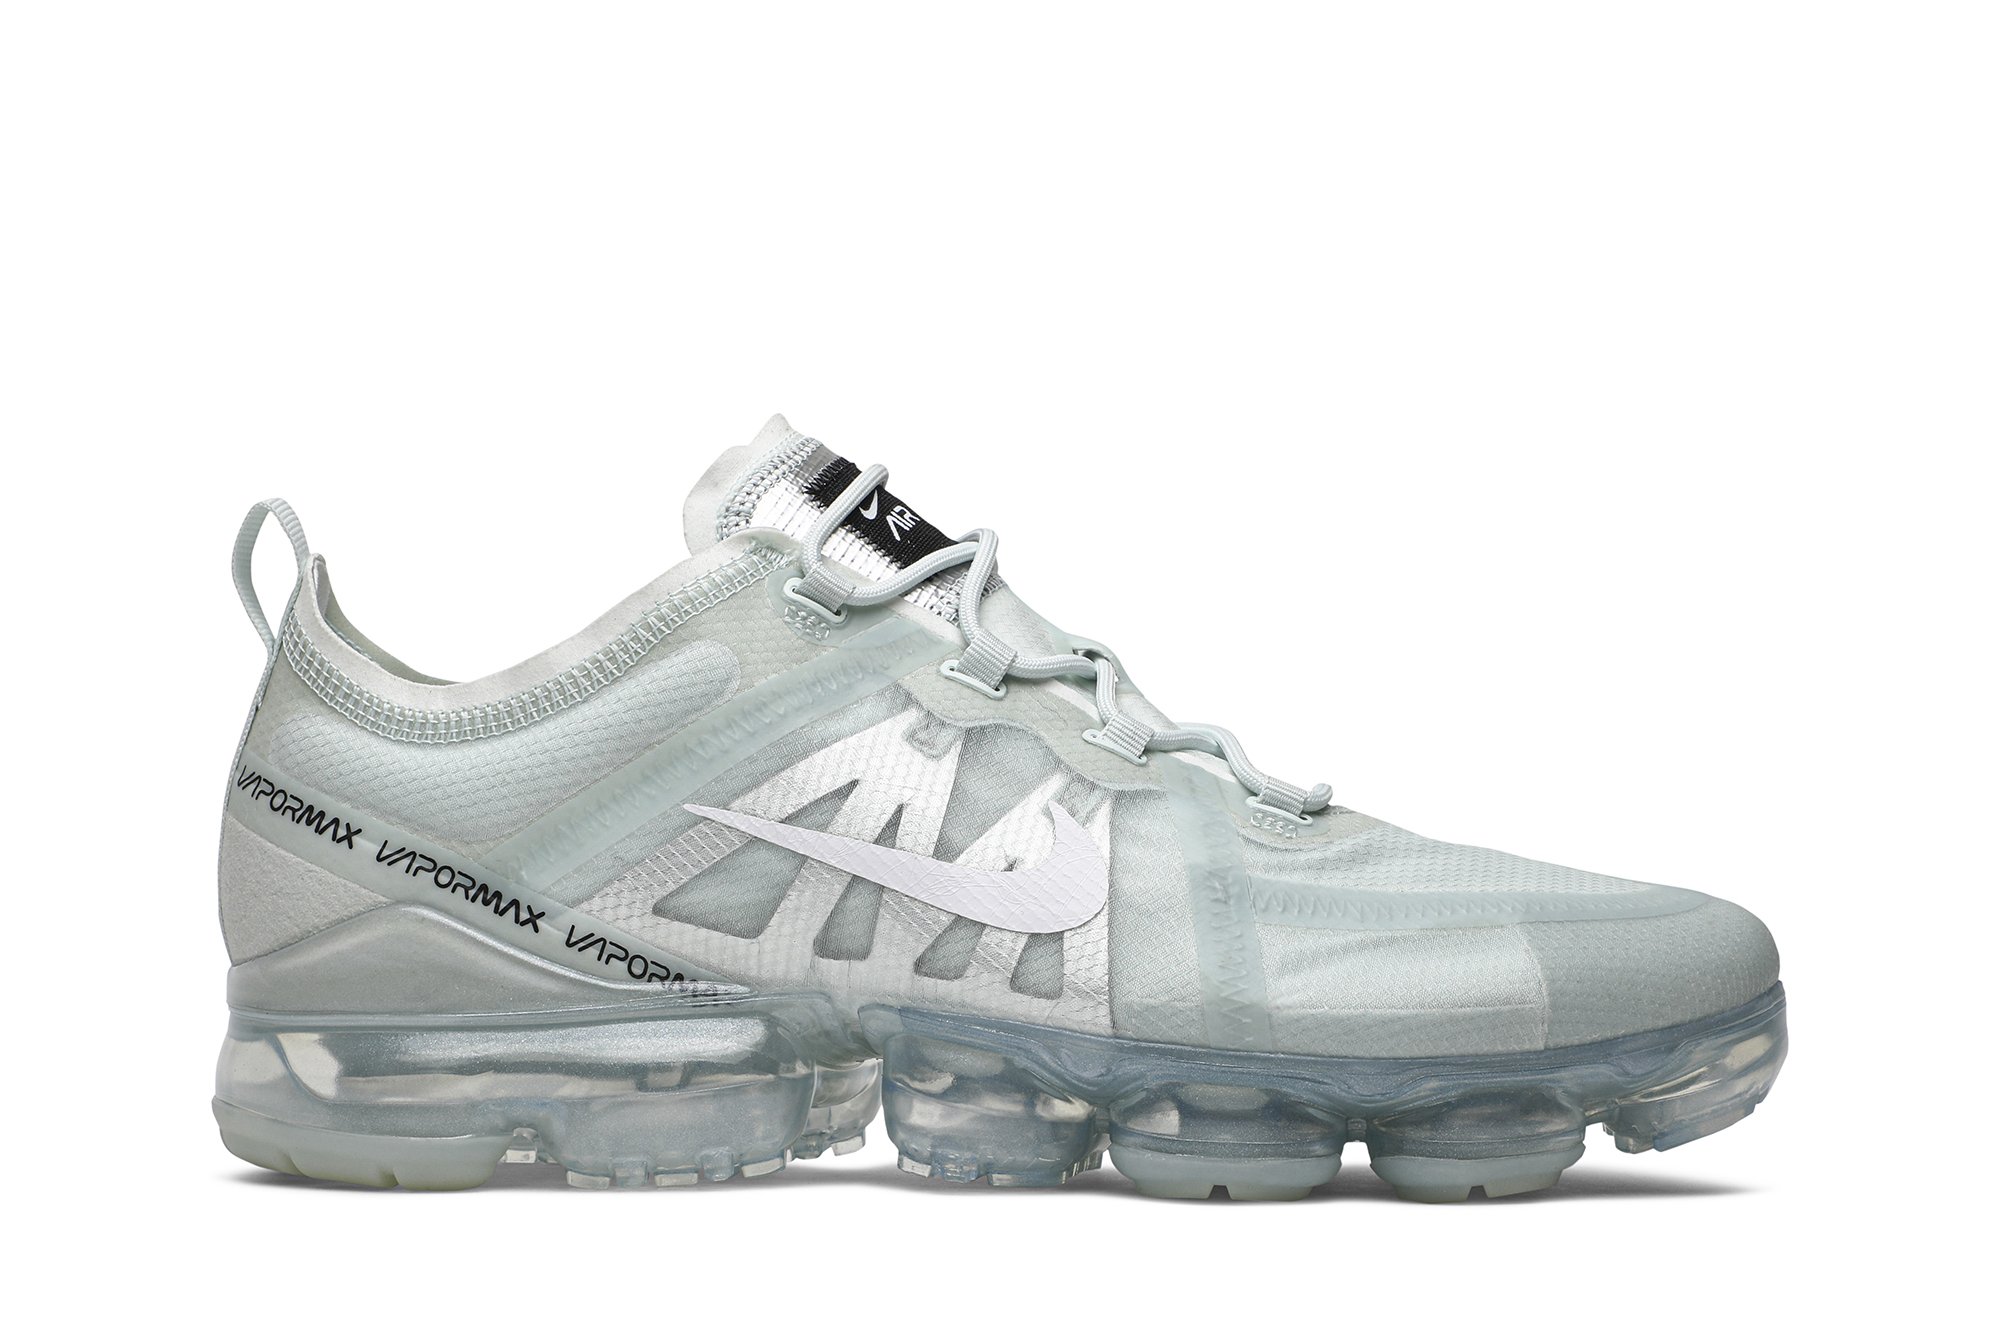 nike vapormax 2019 trainers in grey